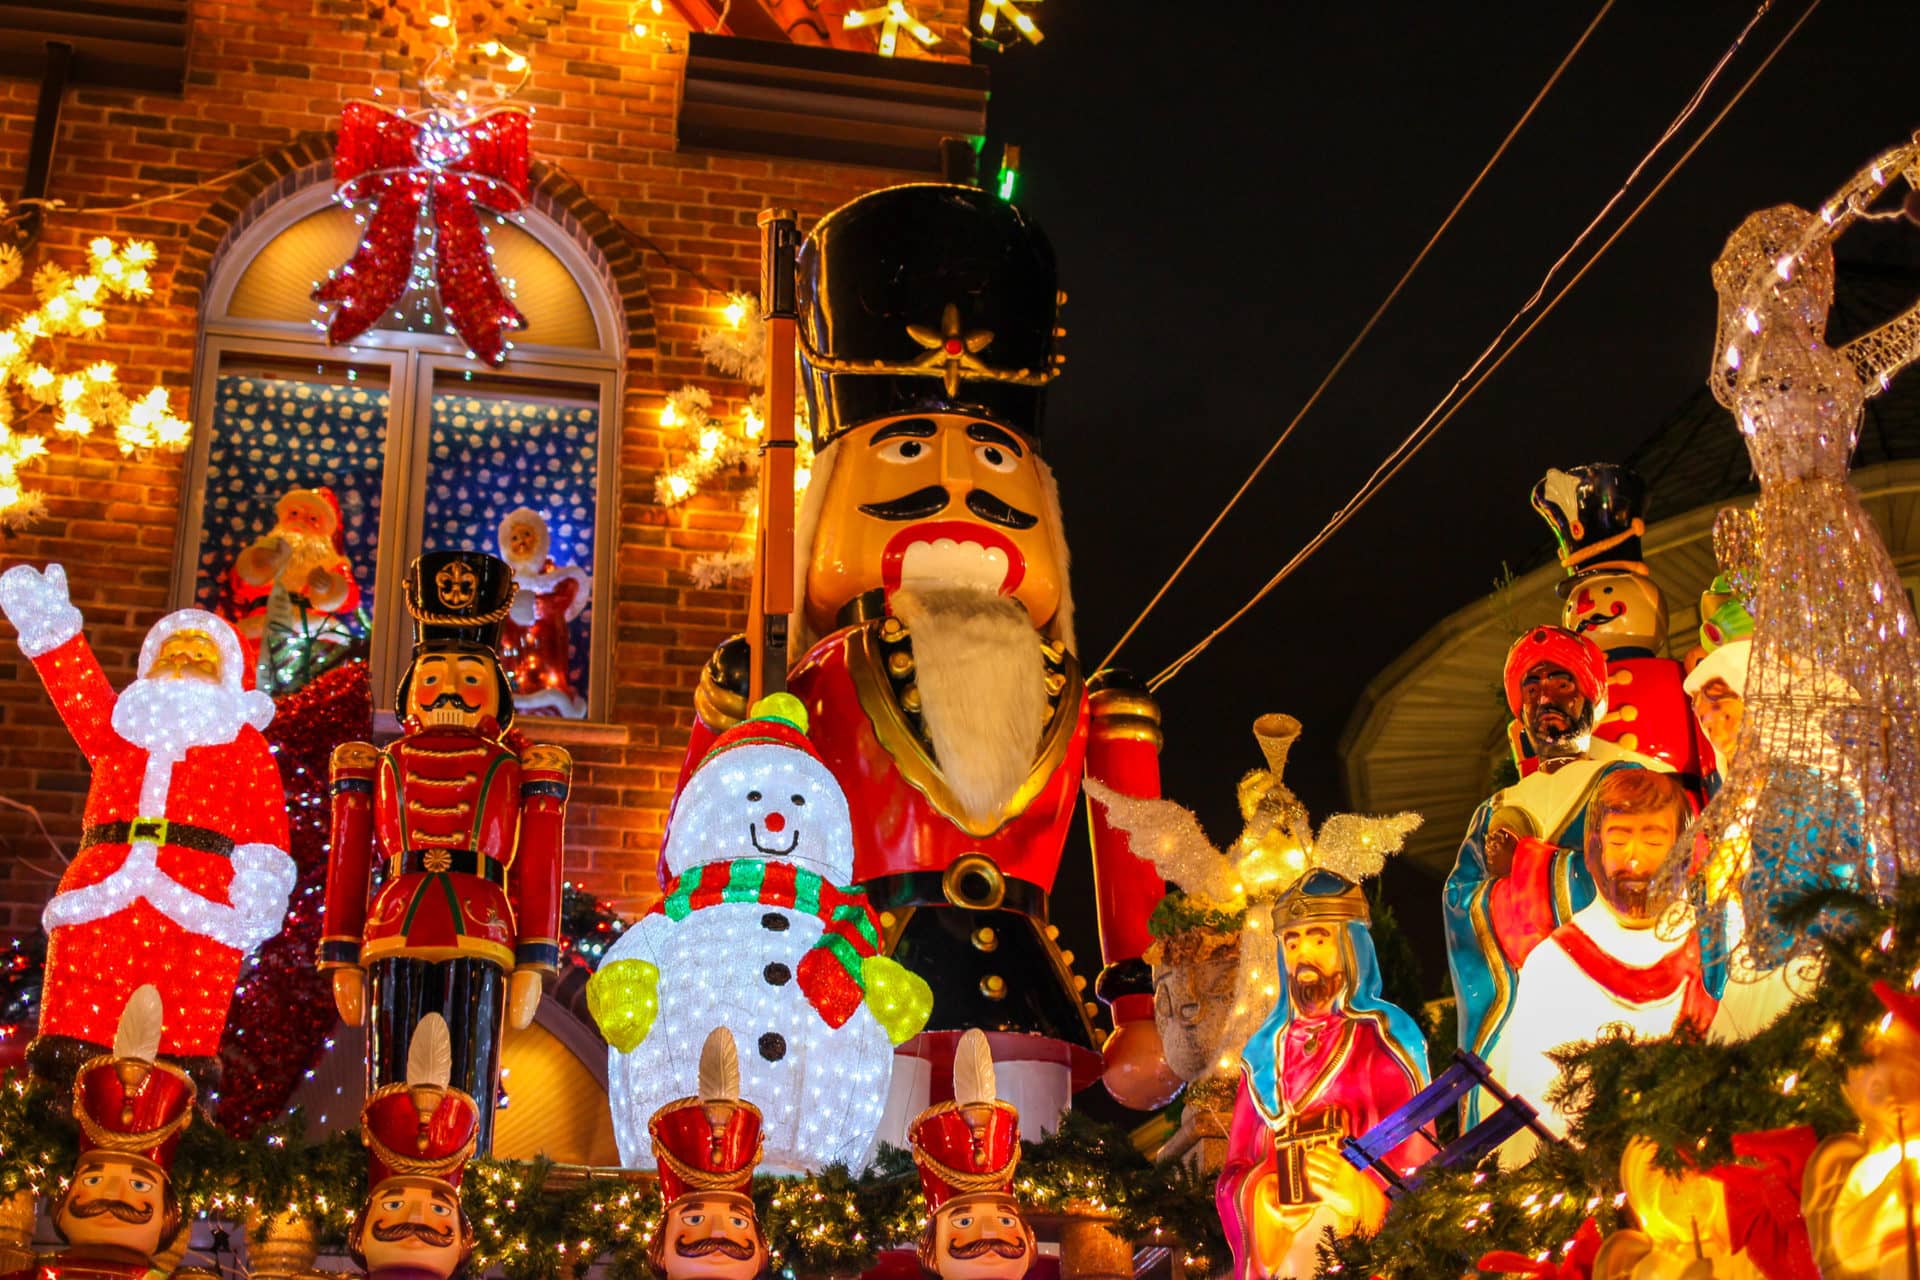 Forget Rockefeller Center—New York City’s best holiday light displays are in southwest Brooklyn